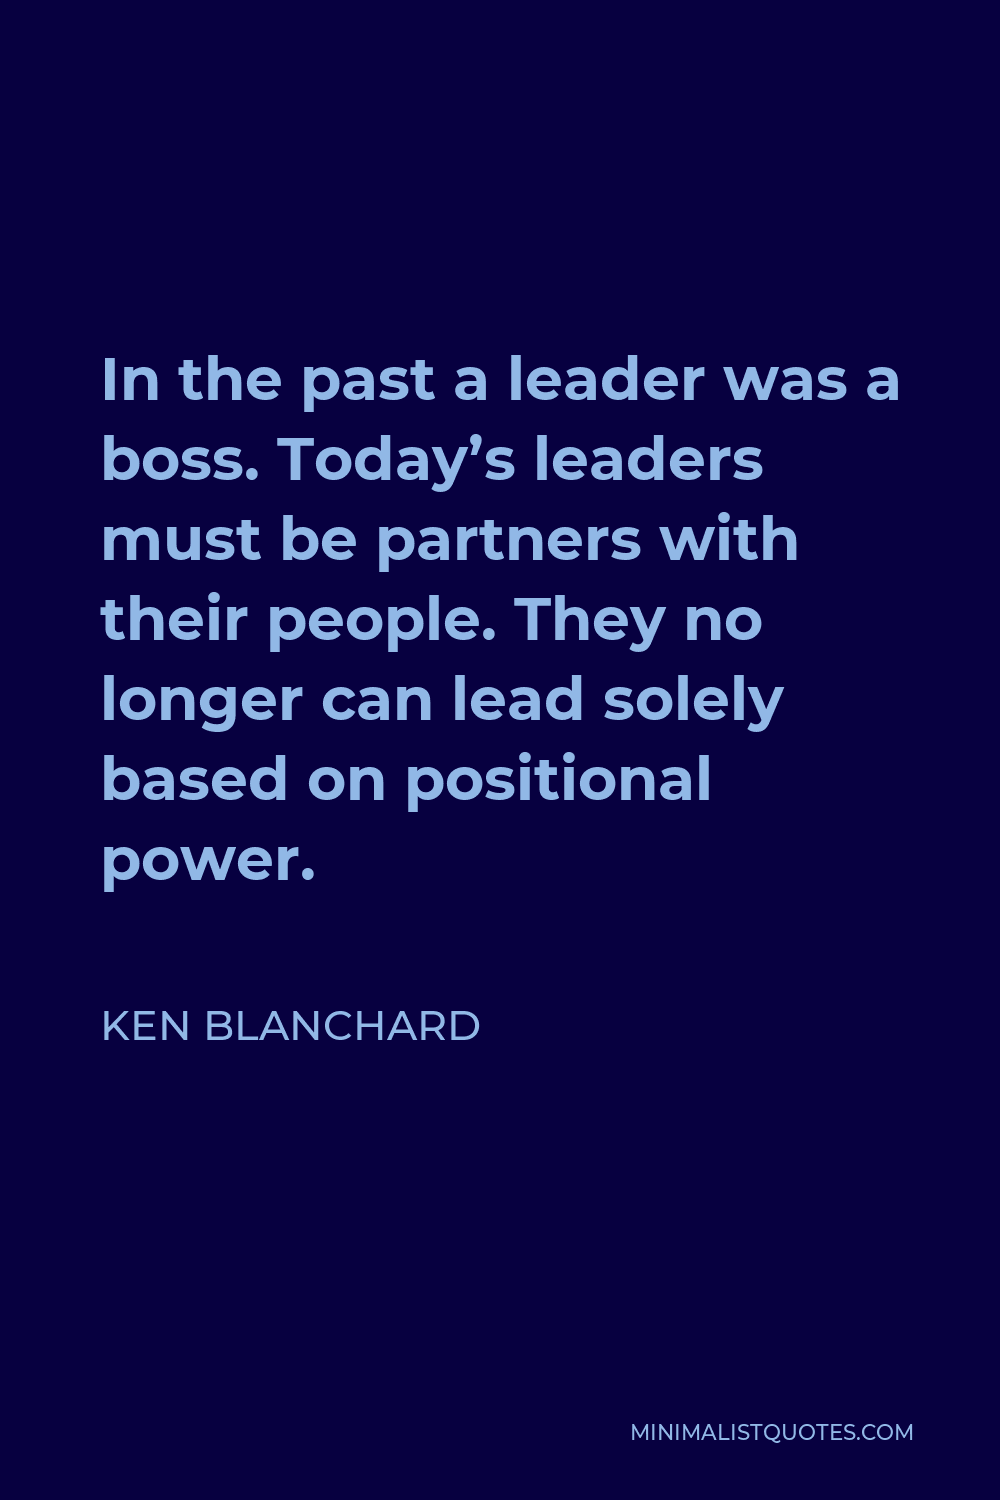 Ken Blanchard Quote - In the past a leader was a boss. Today’s leaders must be partners with their people. They no longer can lead solely based on positional power.